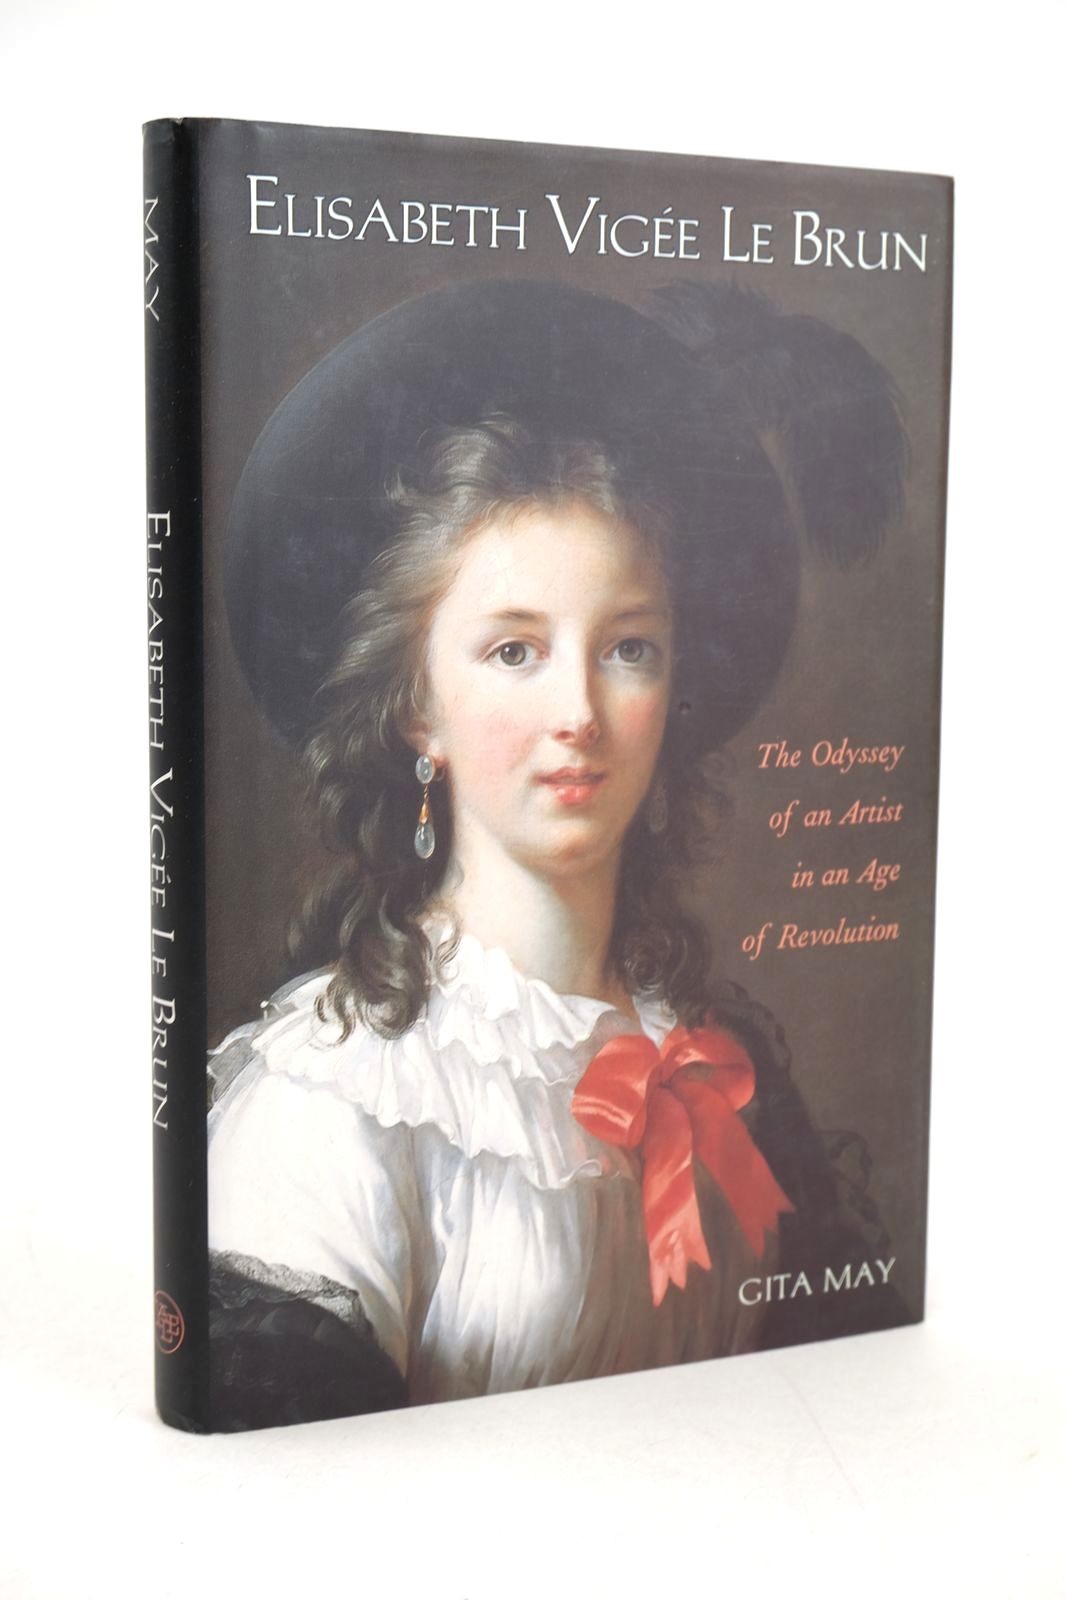 Photo of ELISABETH VIGEE LE BRUN written by May, Gita published by Yale University Press (STOCK CODE: 1327702)  for sale by Stella & Rose's Books